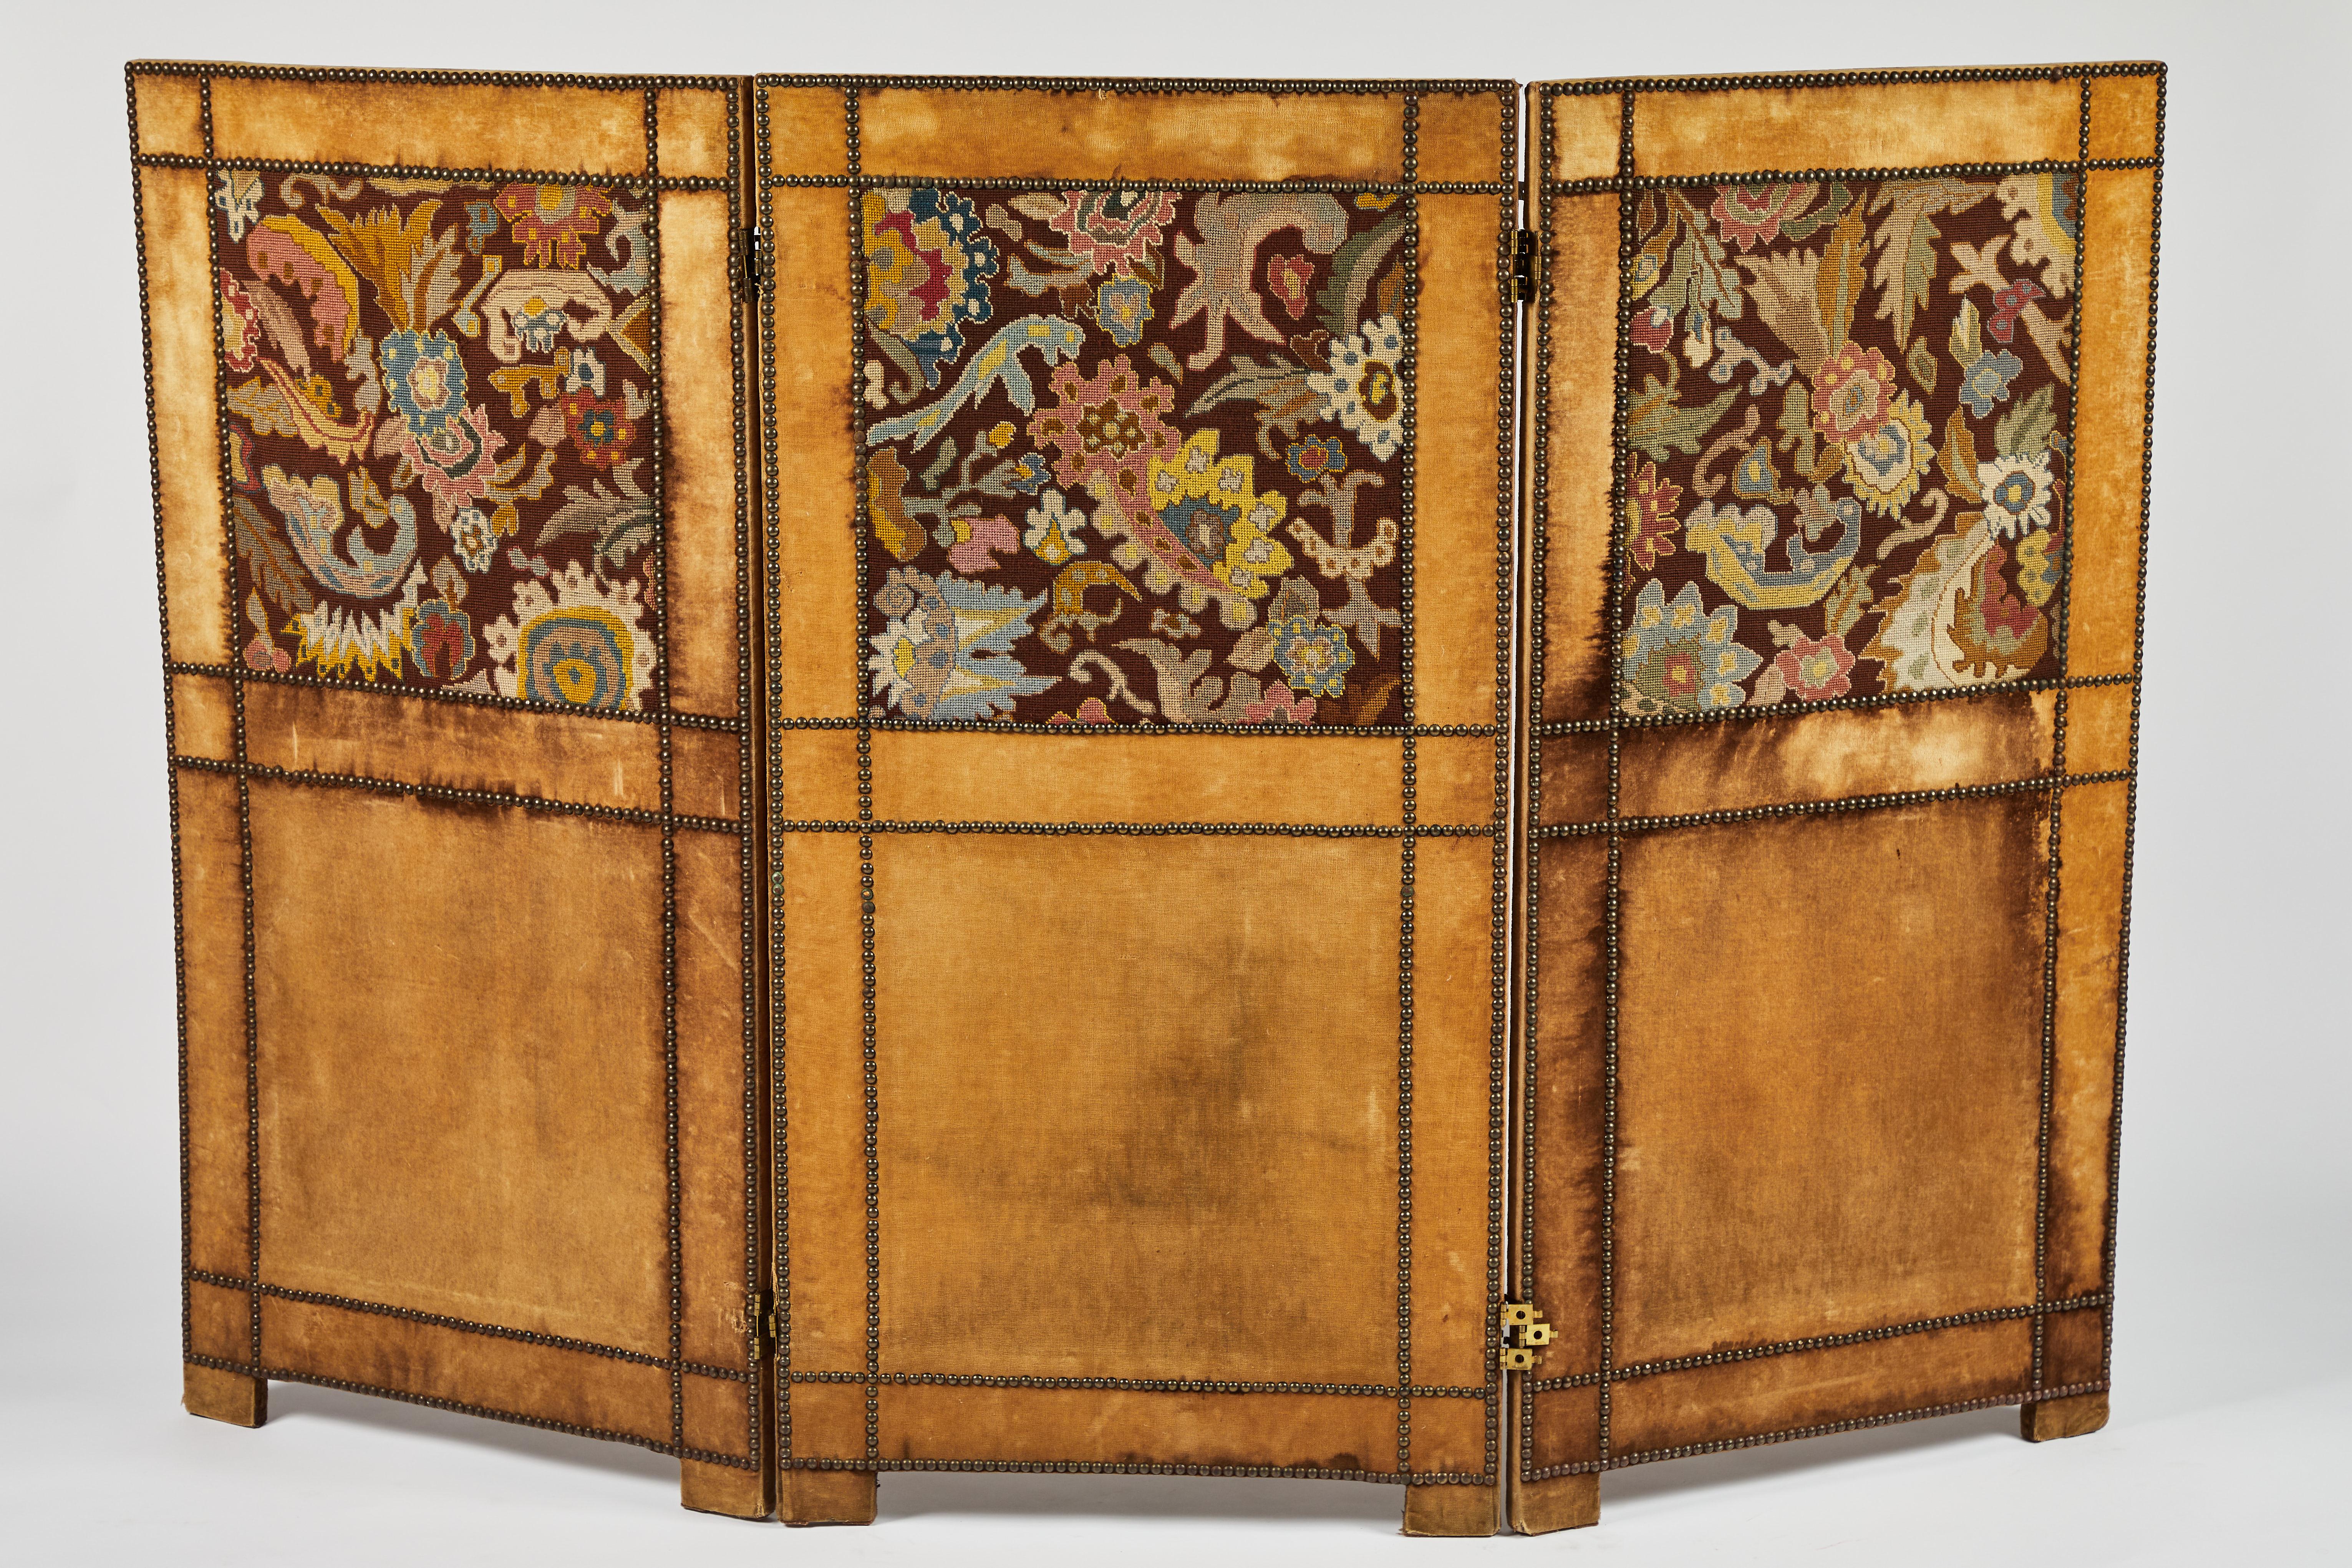 Three-panel velvet upholstered folding screen or room divider with inset European tapestry fragments. Each side panel is clad in a vivid wool tapestries and framed with gold velvet. Decorative brass nailhead trim.
Works wonderfully as a headboard!